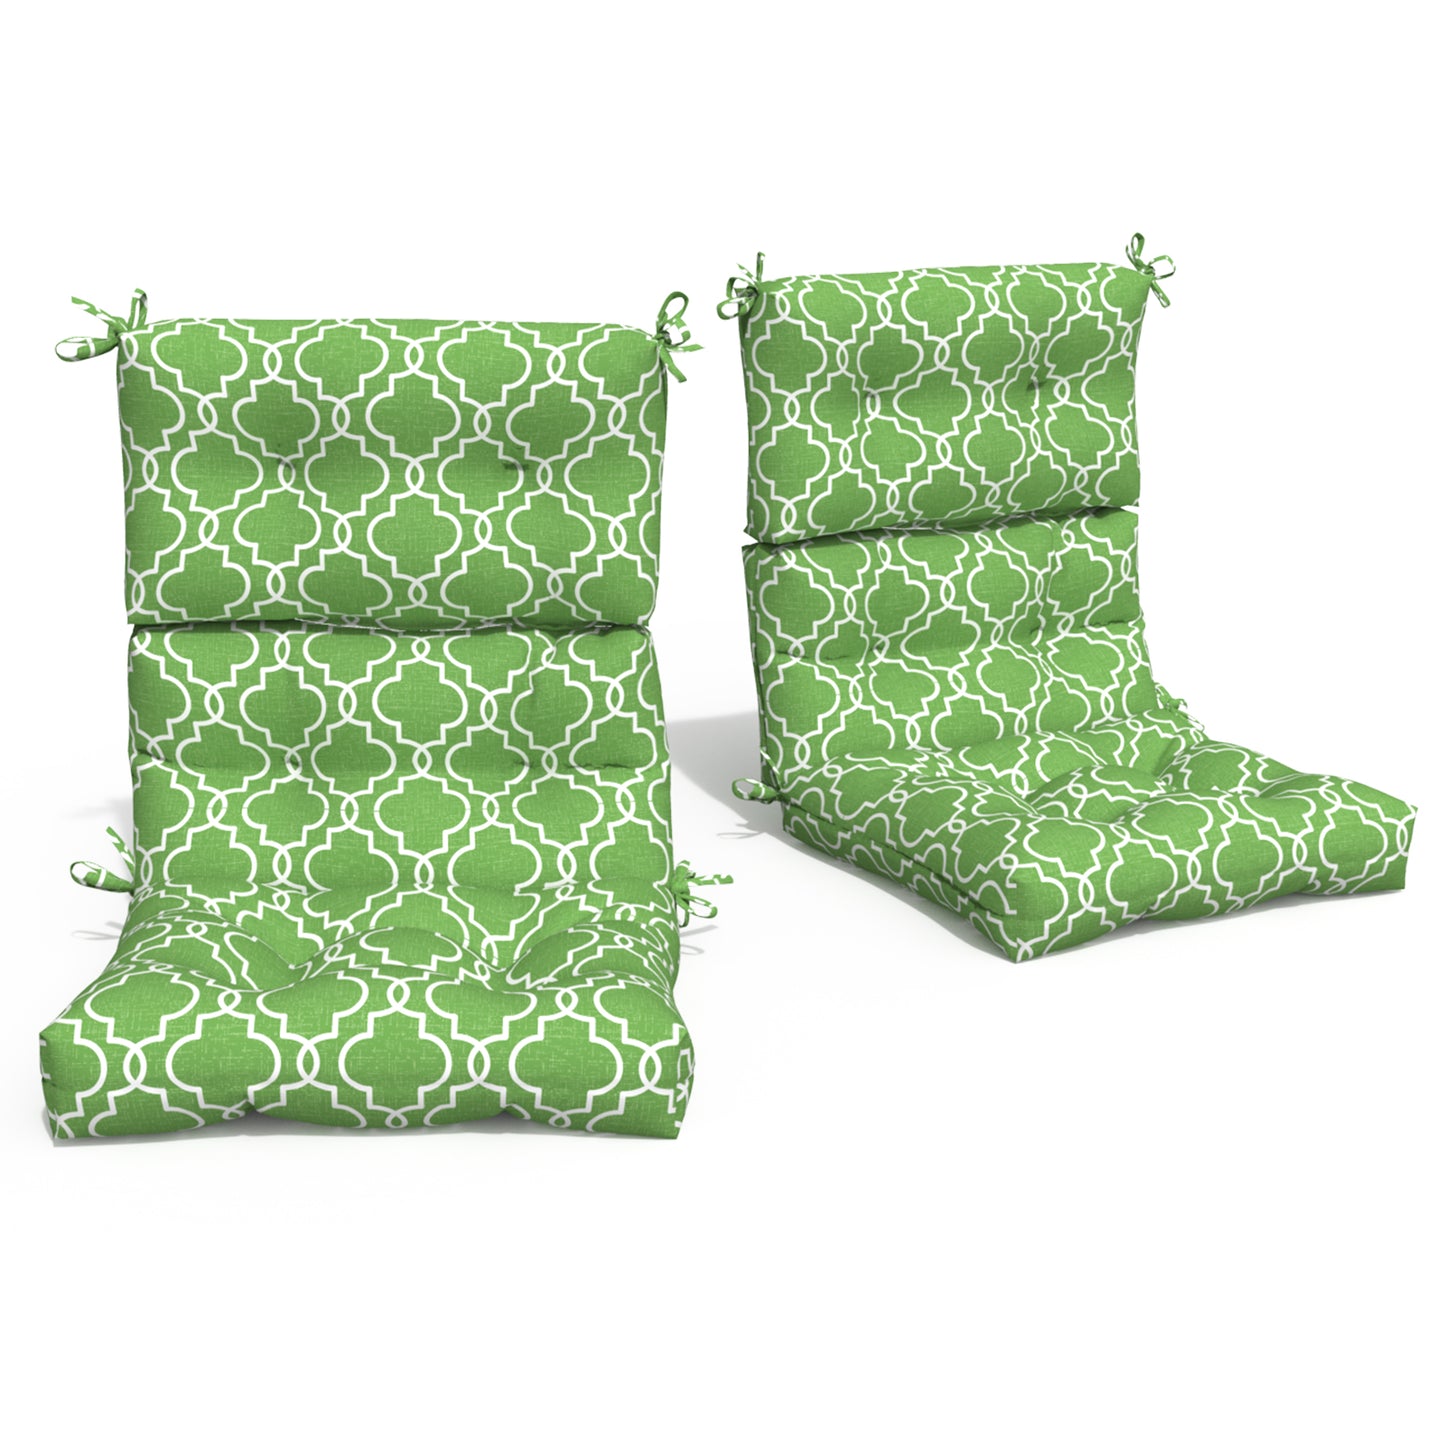 Melody Elephant Outdoor Tufted High Back Chair Cushions, Water Resistant Rocking Seat Chair Cushions 2 Pack, Adirondack Cushions for Patio Home Garden, 22" W x 20" D, Carmody Green